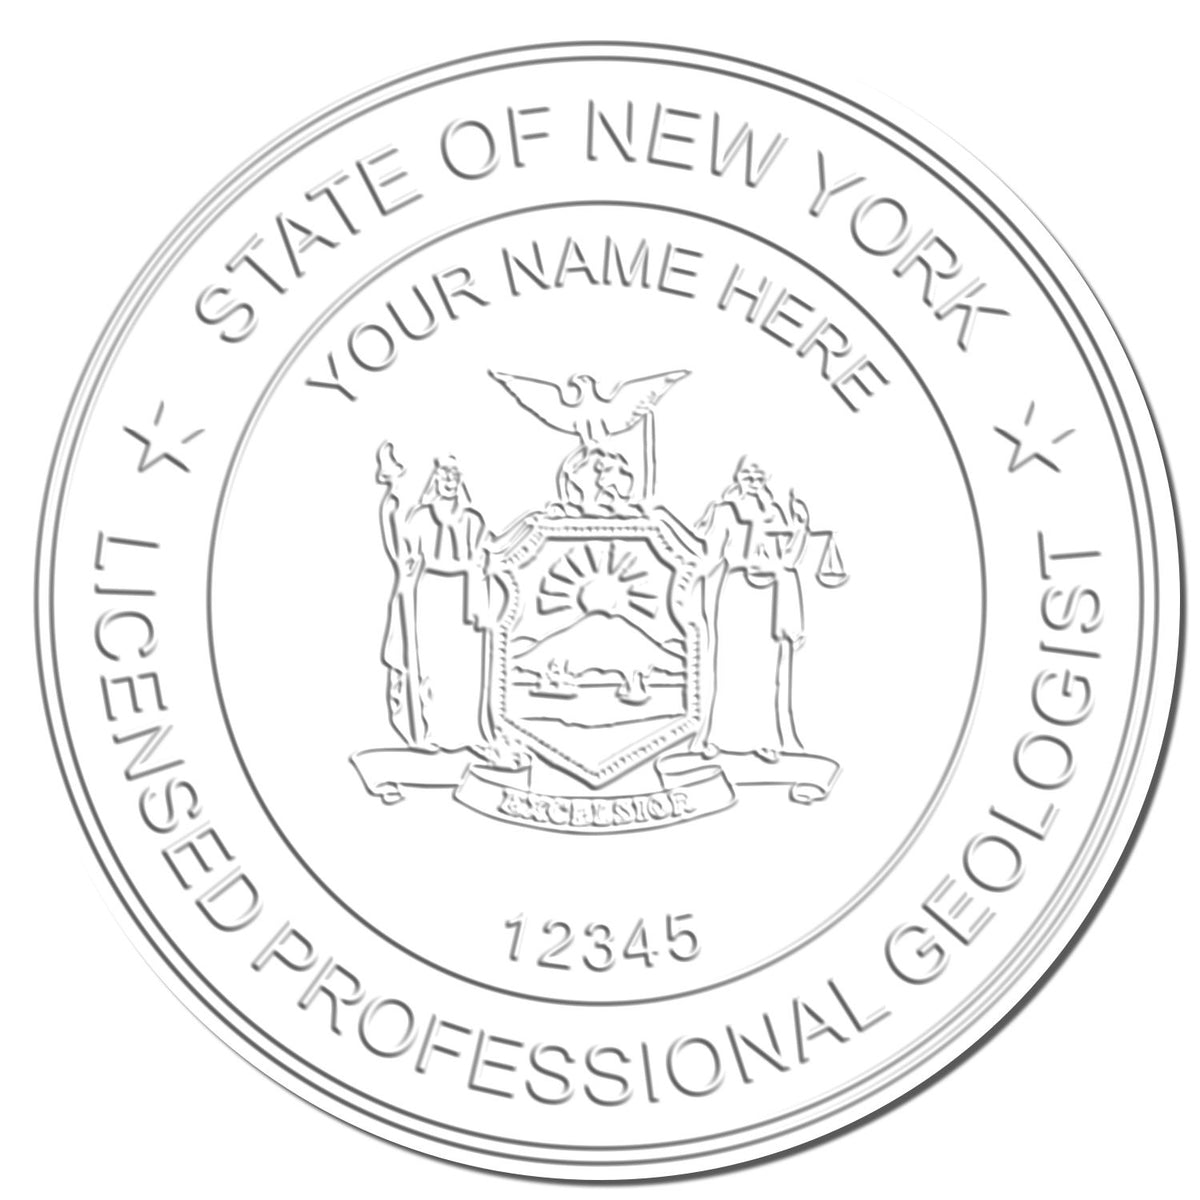 A stamped imprint of the Long Reach New York Geology Seal in this stylish lifestyle photo, setting the tone for a unique and personalized product.